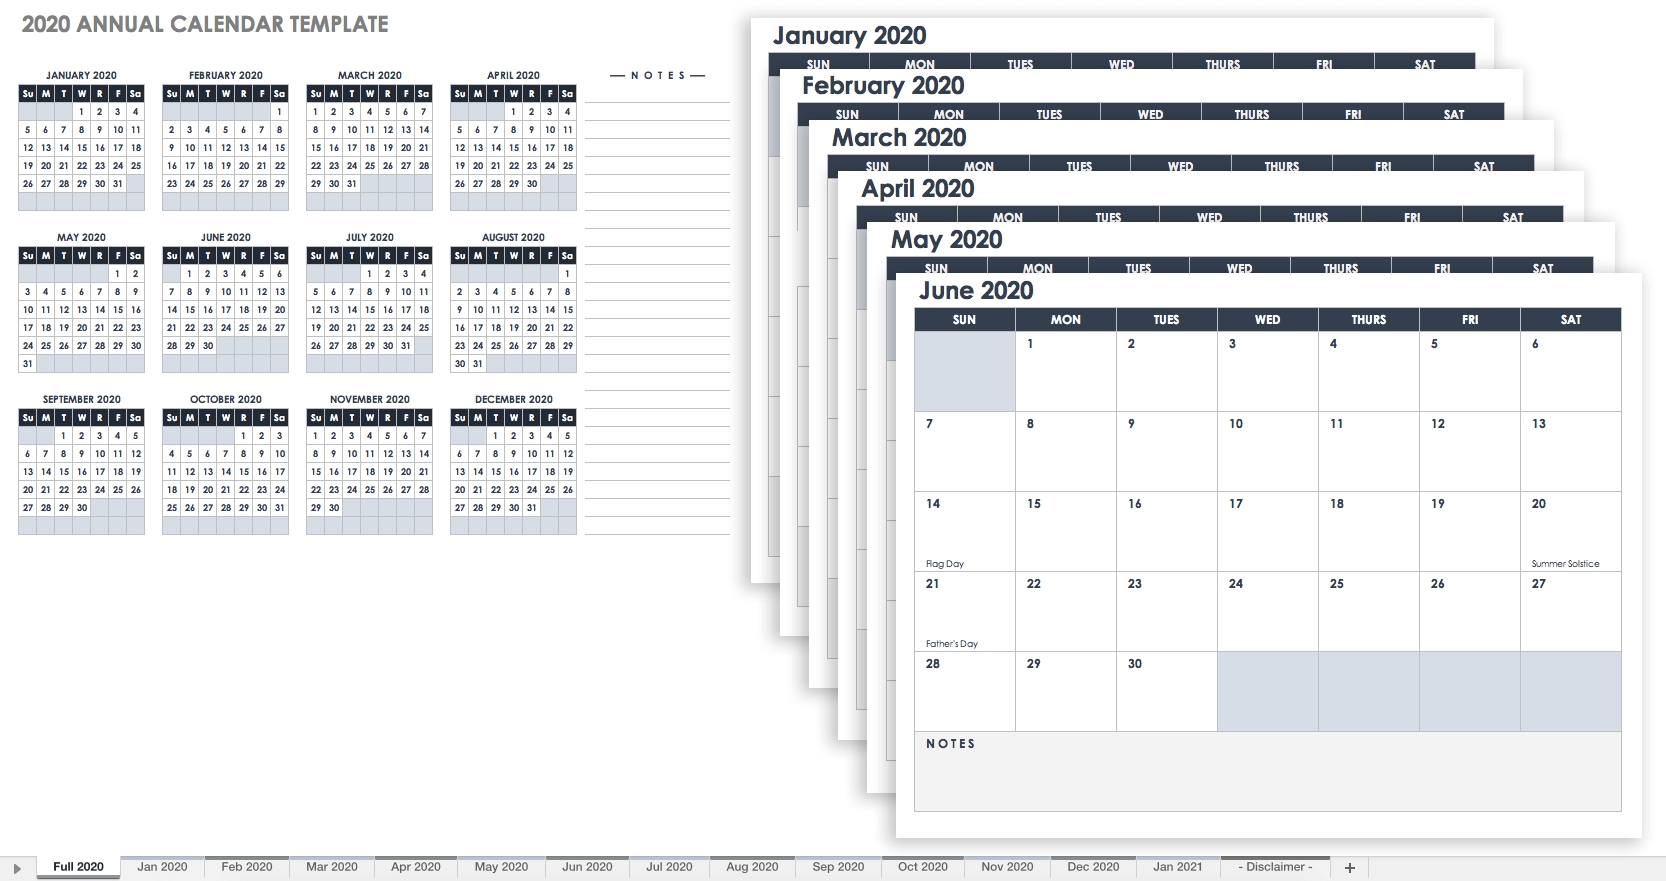 Free Excel Calendar Templates-How To Design Writeable Monthly Bill-Payments Calendar Template 2020